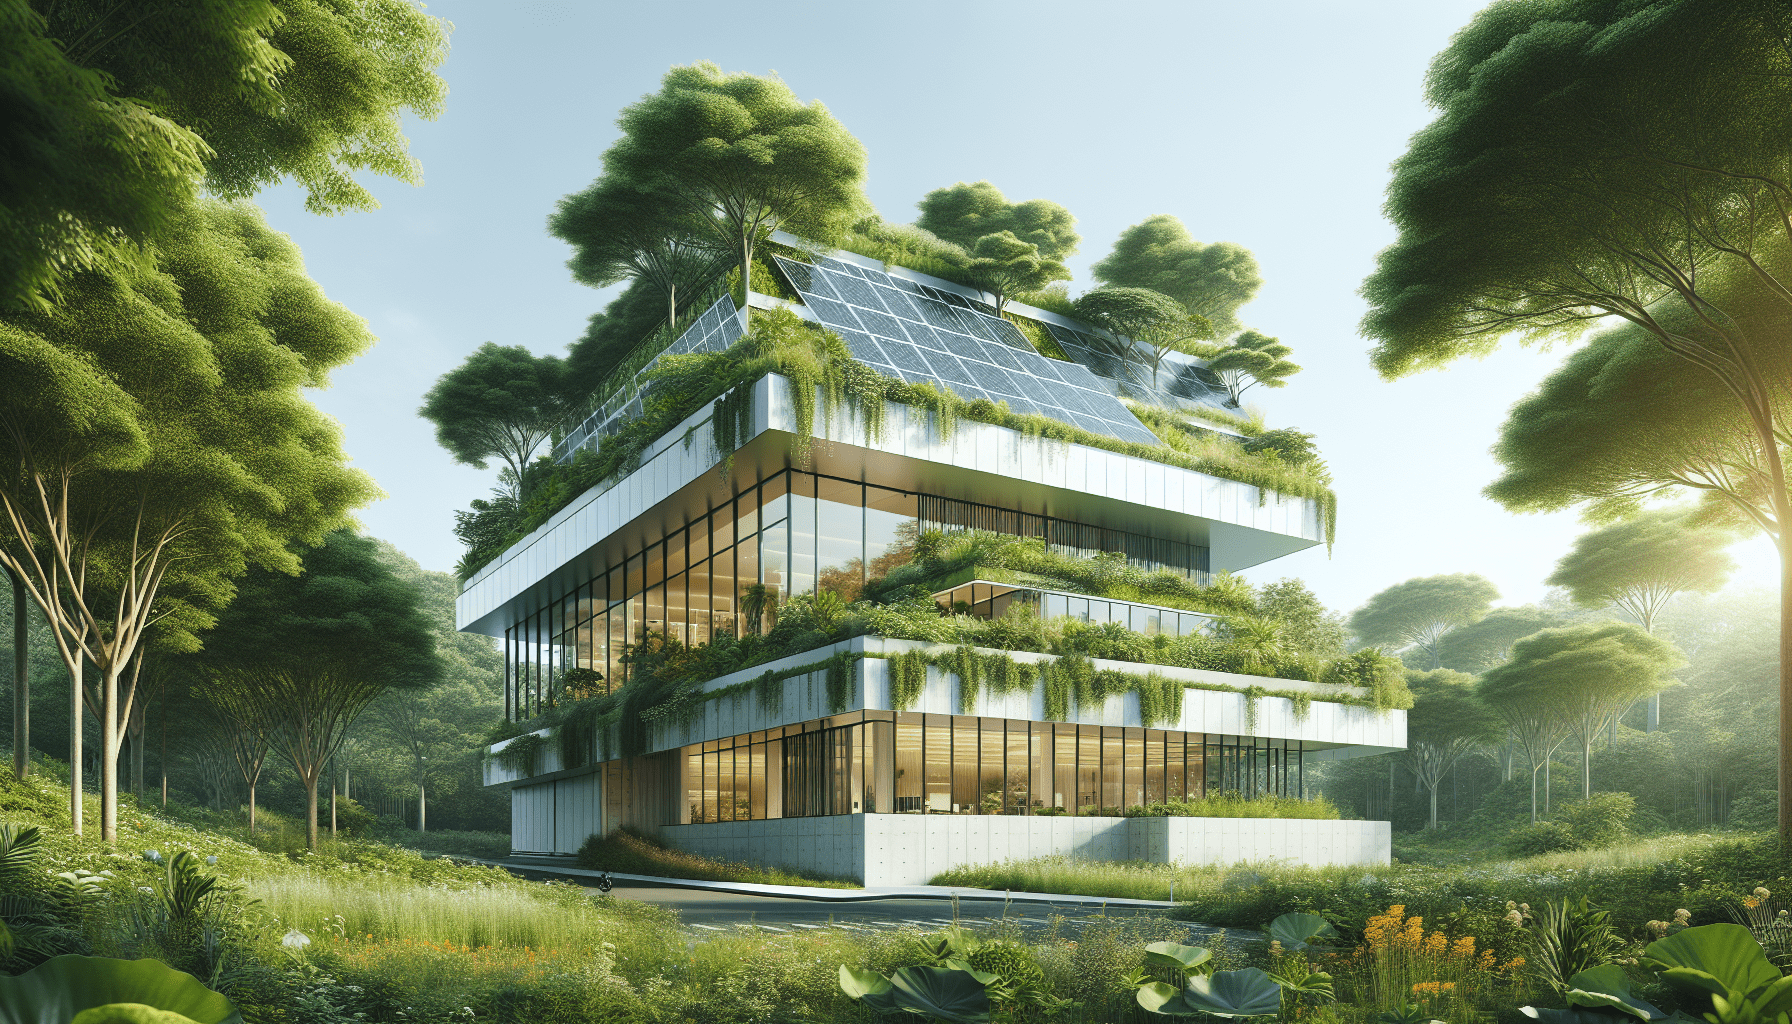 Principles of Sustainable Architecture